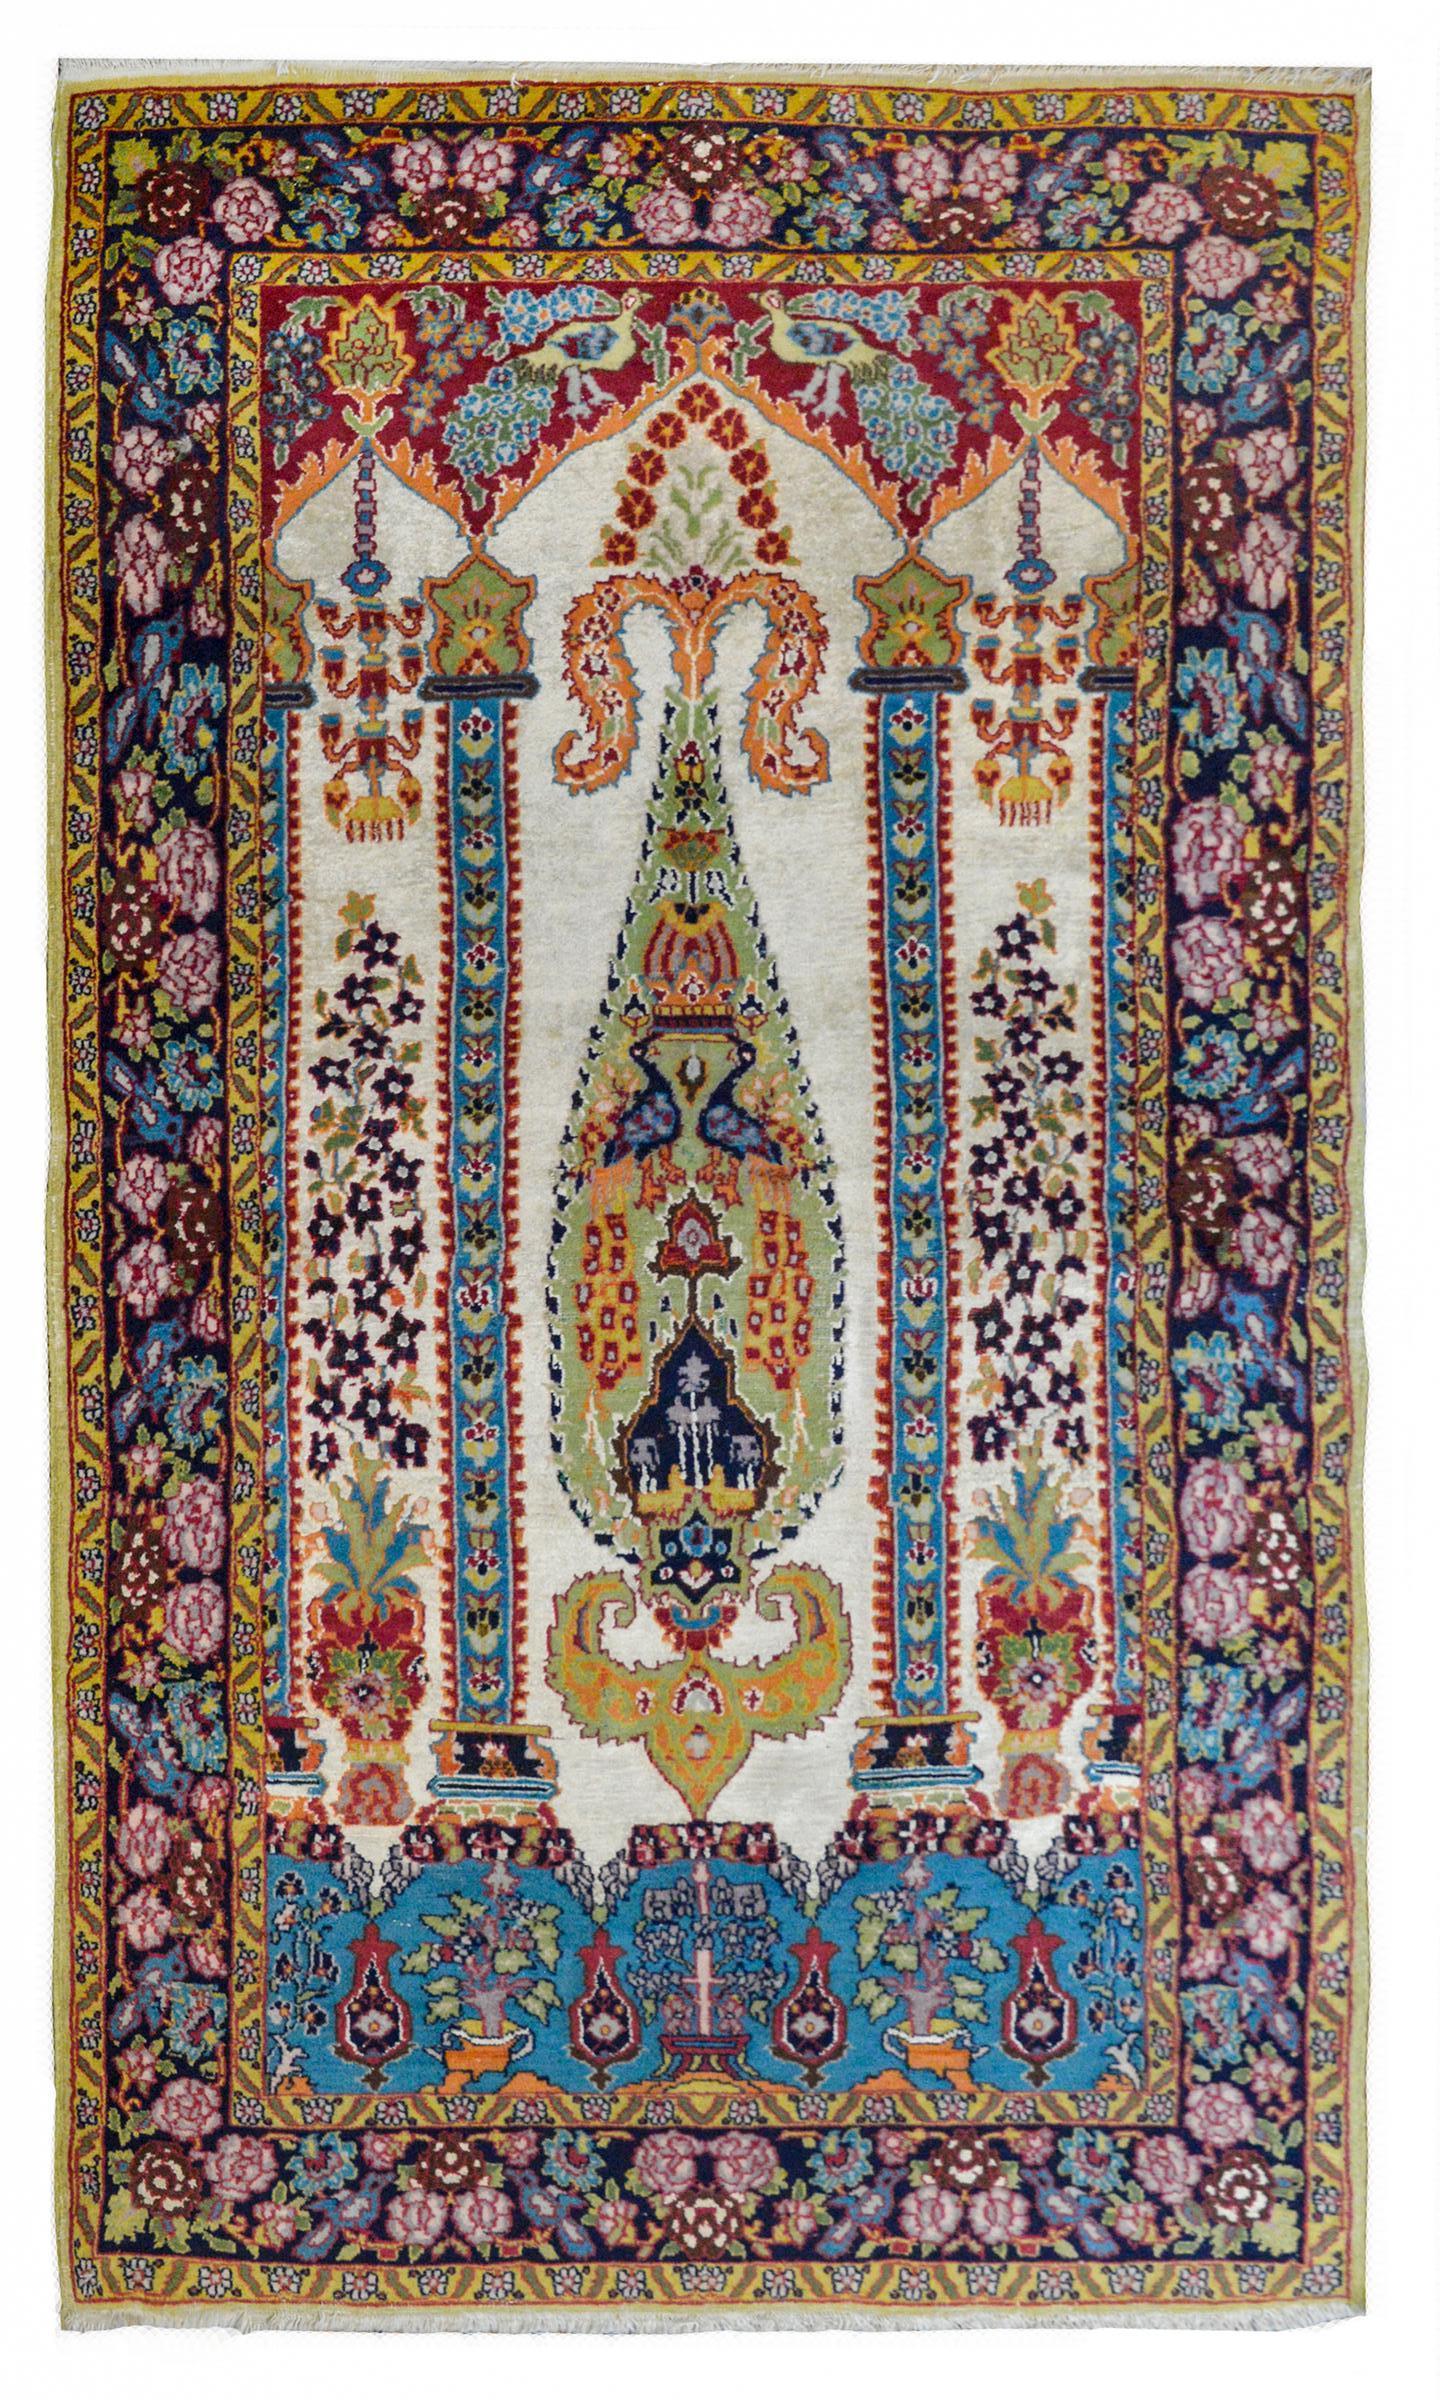 A beautiful mid-20th century Persian Isfahan prayer rug with an architectural elements like columns, chandeliers, and pointed arches, all with myriad flowers, vines, and potted plants, with peacocks and other birds, woven in myriad colors. The